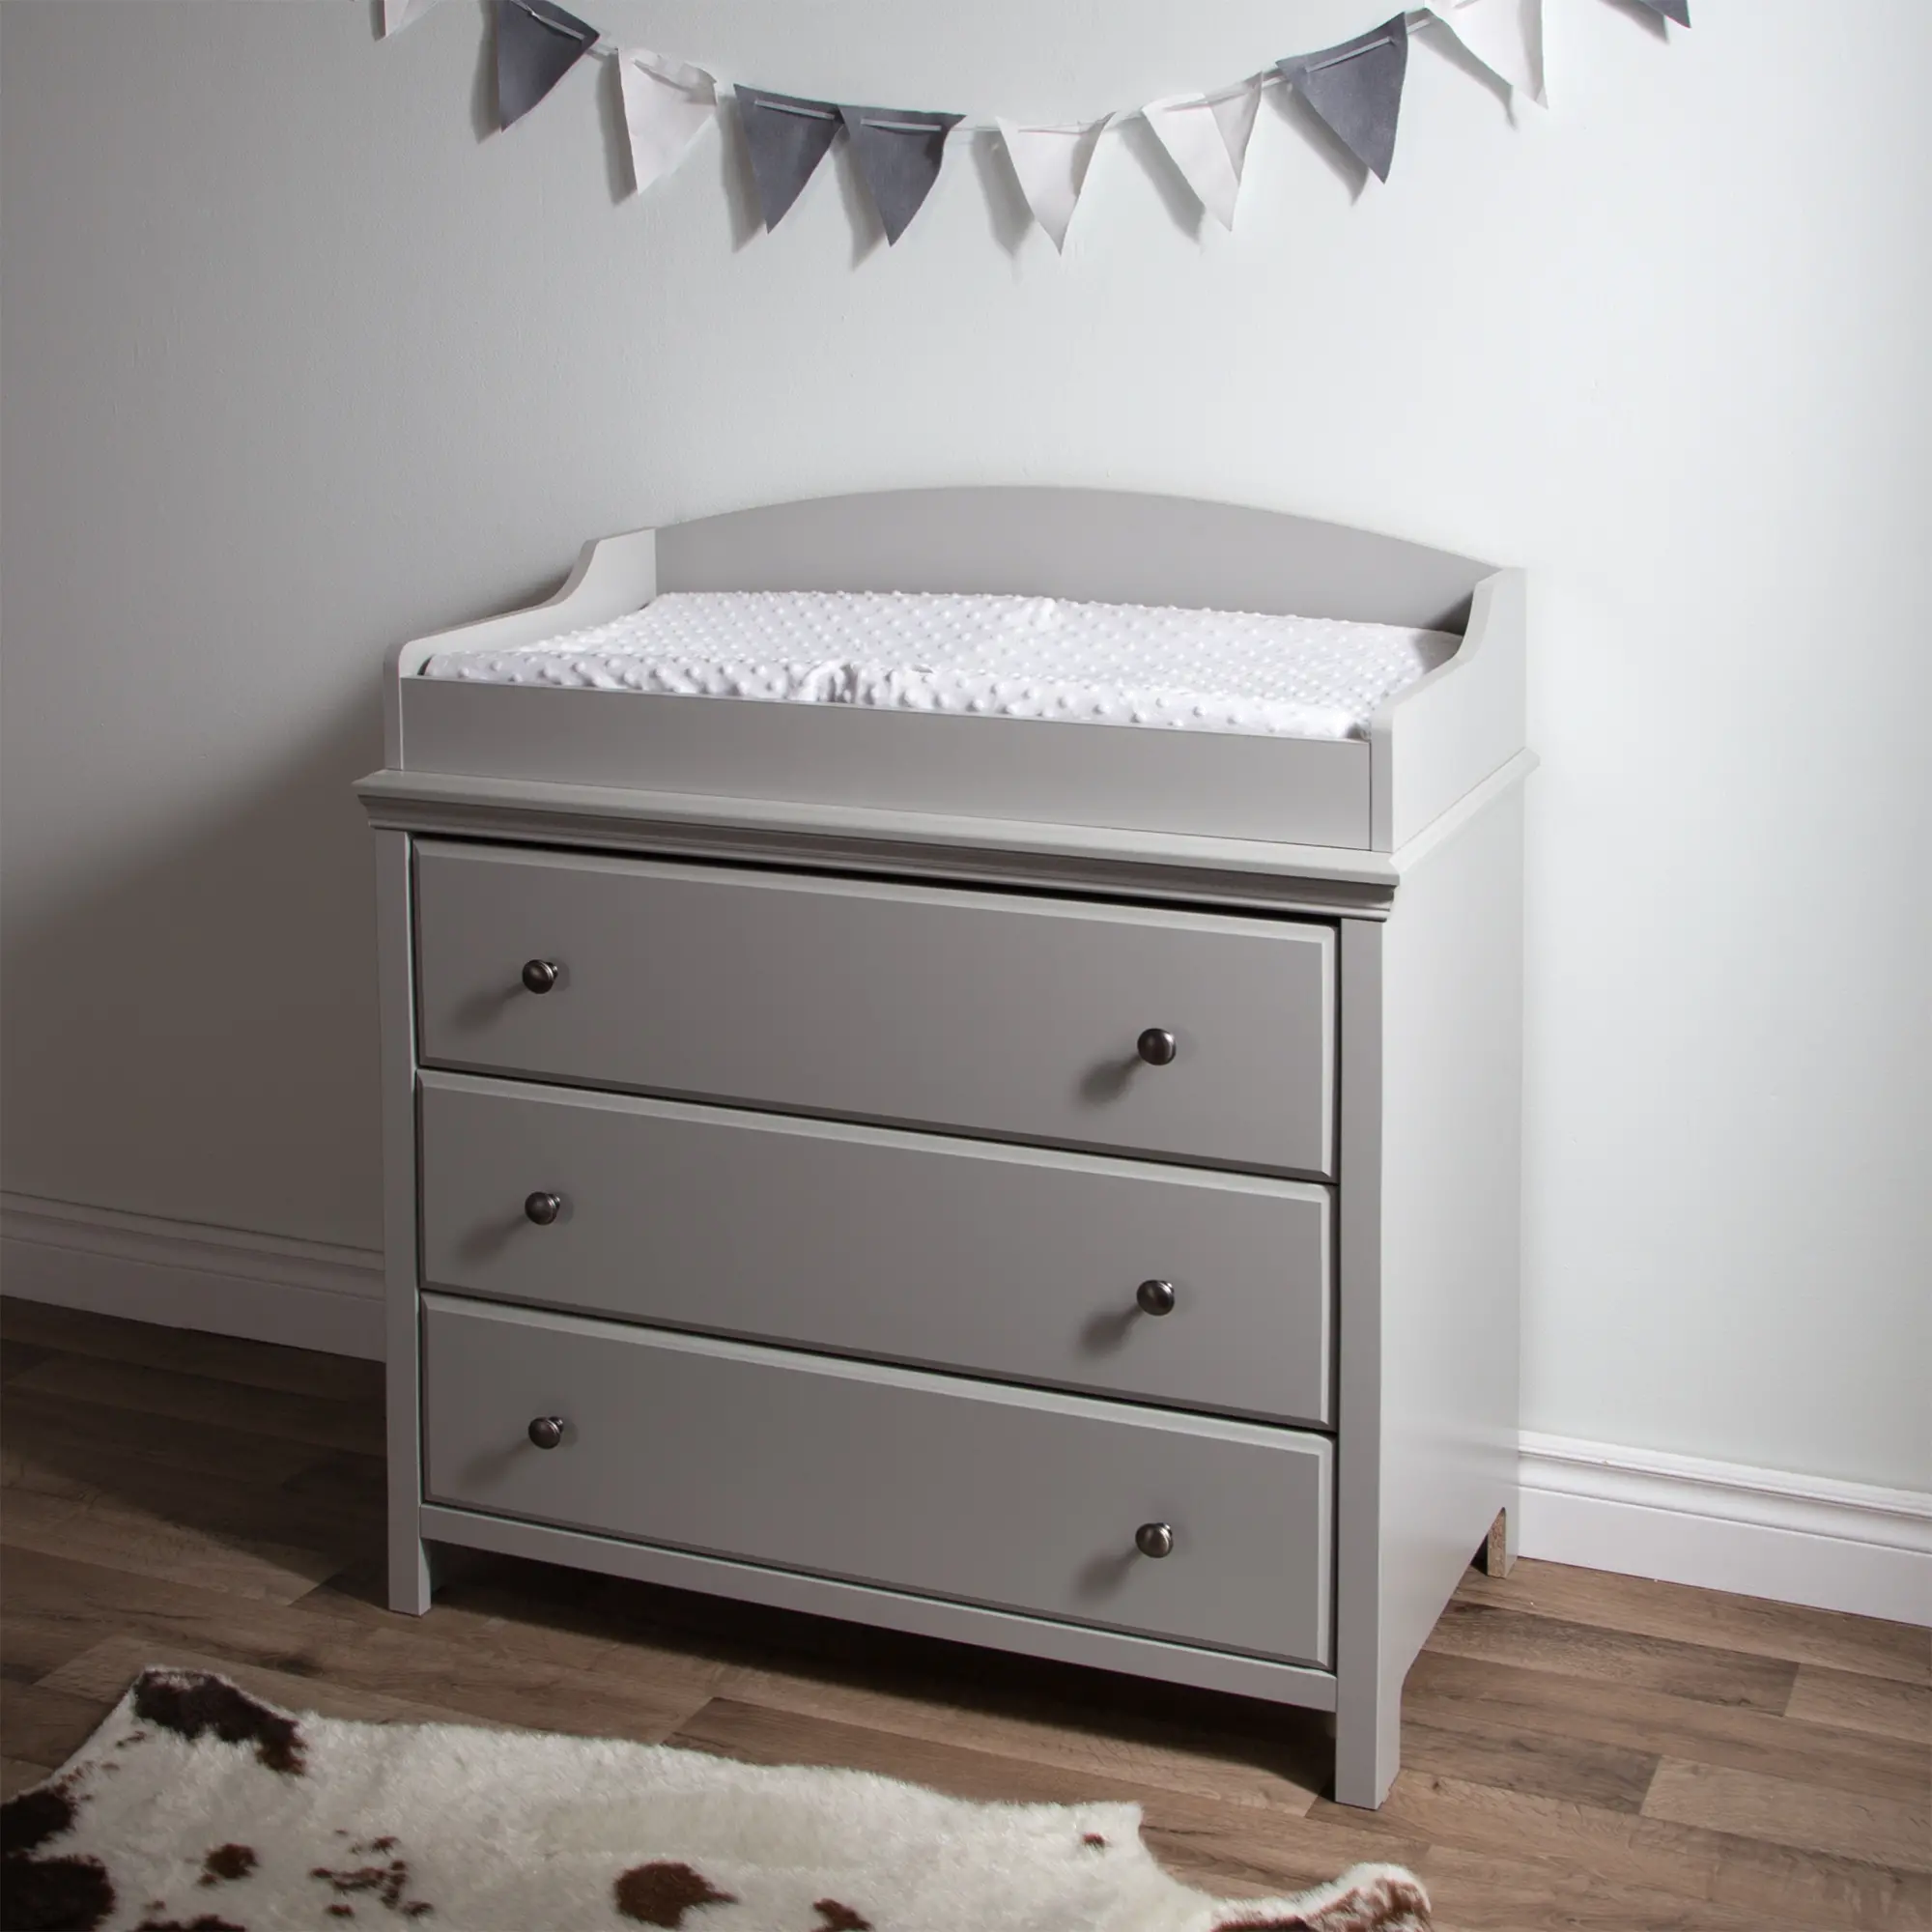 9020330 Cotton Candy Gray Changing Table with Drawers - So sku 9020330